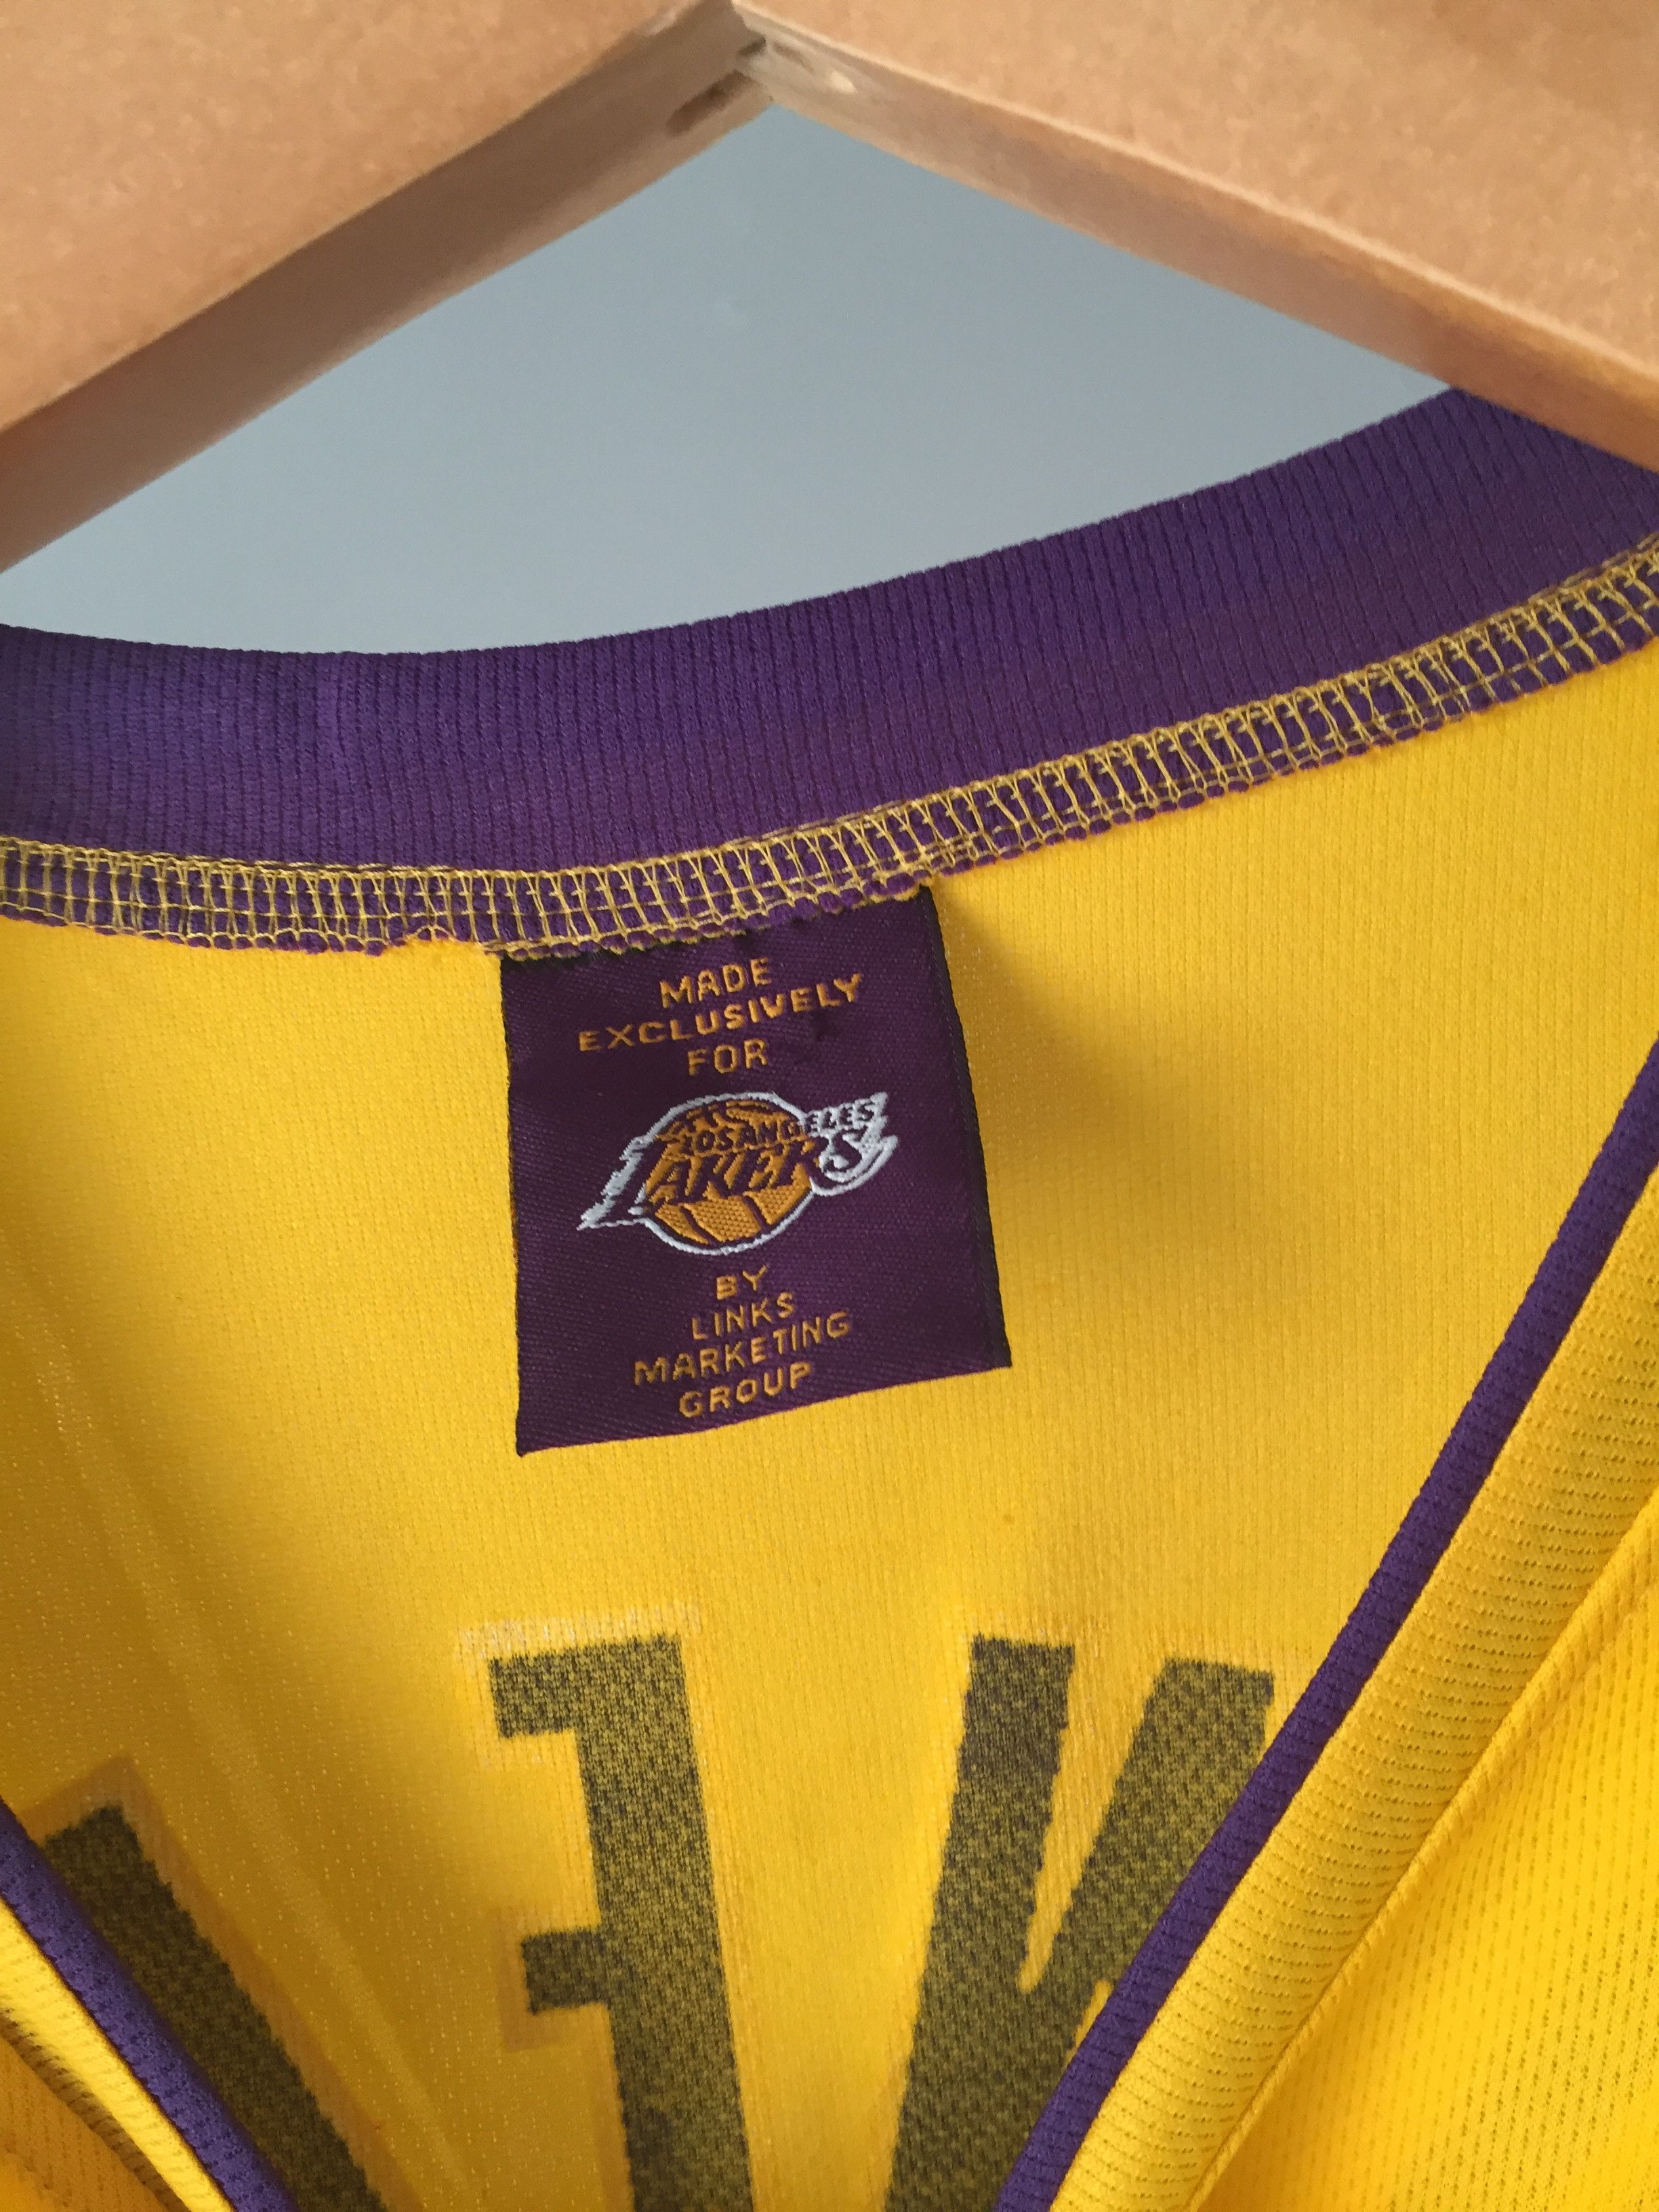 Los Angeles Jersey Los Angeles lakers O'Neal jersey 34 Size US XL / EU 56 / 4 - 2 Preview